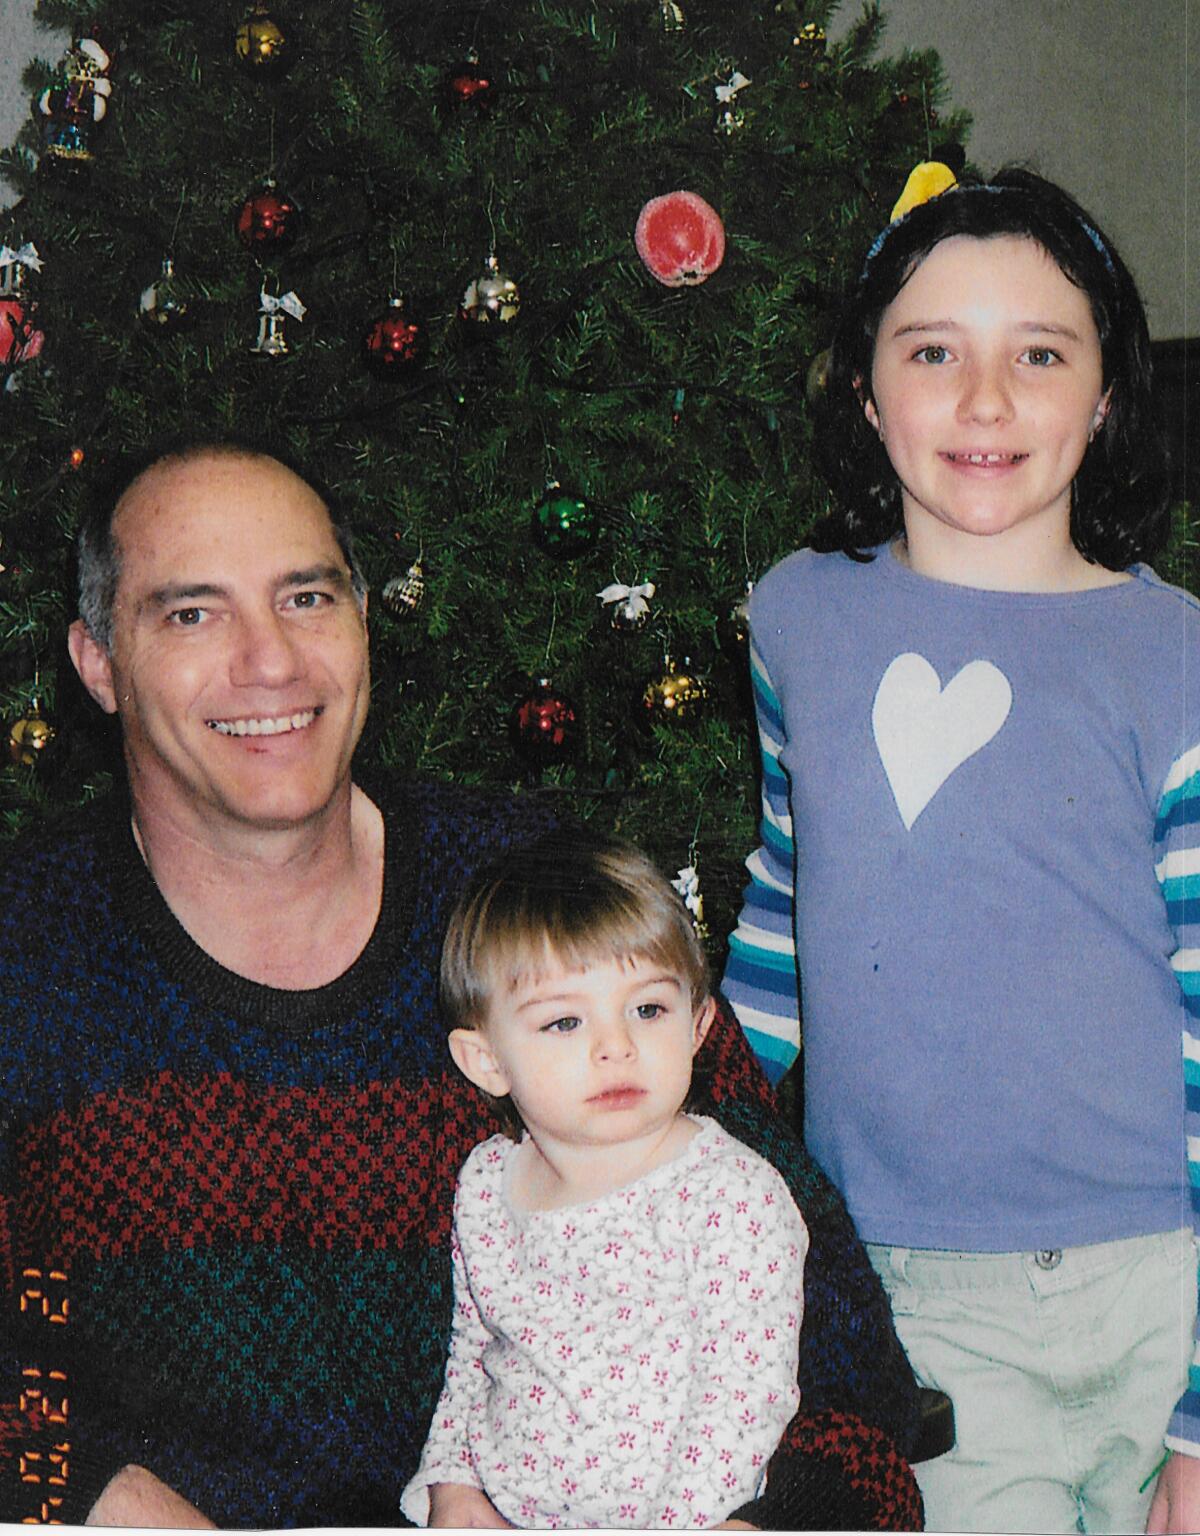 Patrick Burns smiles by a Christmas tree with his daughters.